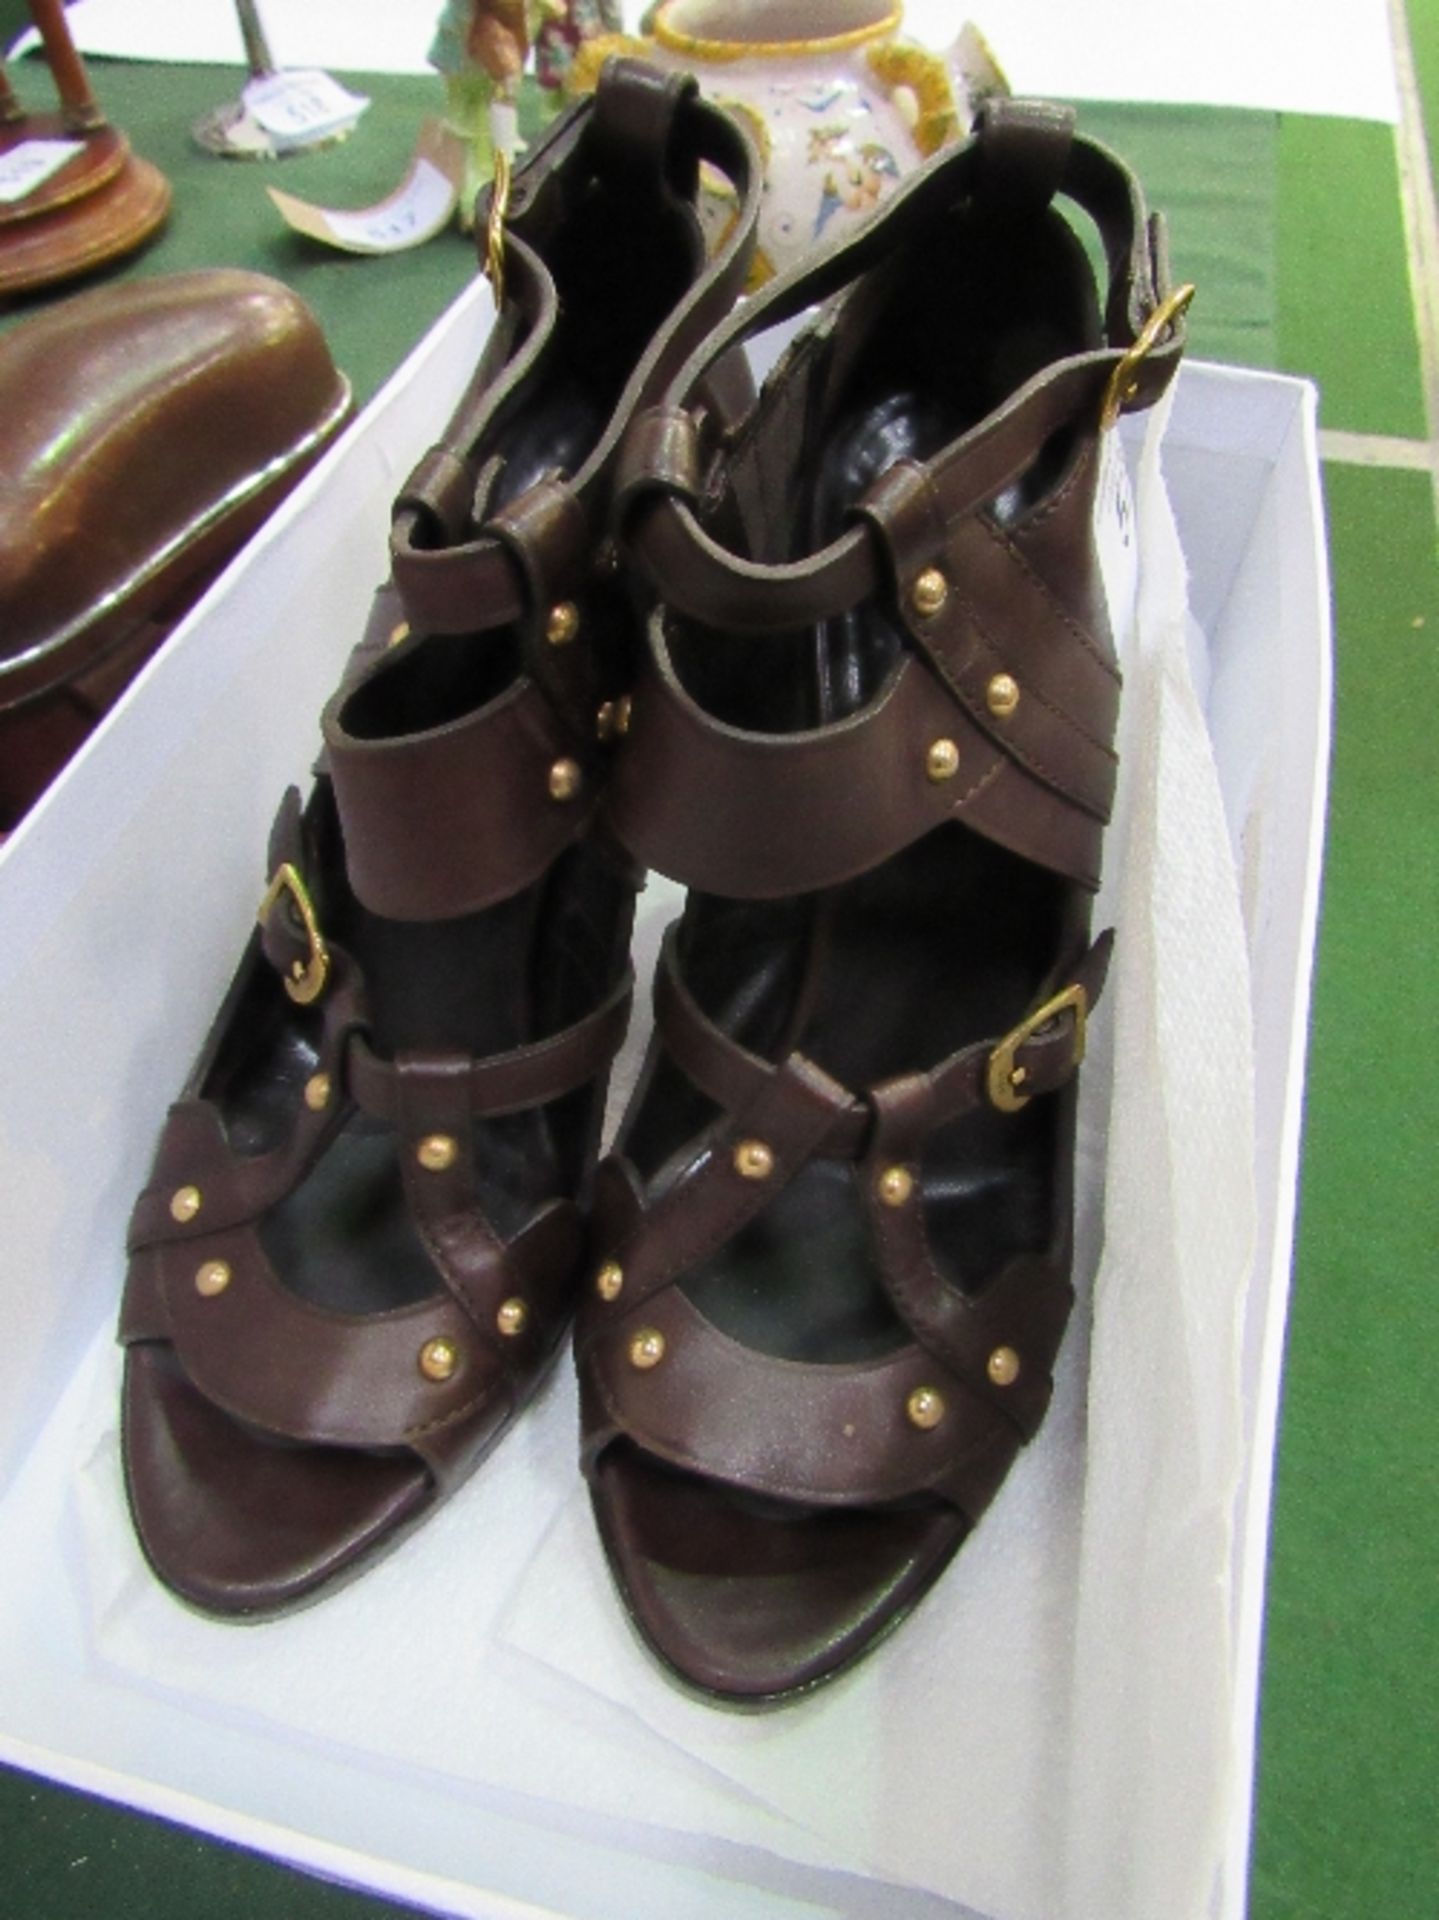 Pair of lady's Gucci Cocoa shoes, code no. 206772, San Pelle S Cuolo Lifford Pumps, size 38 (